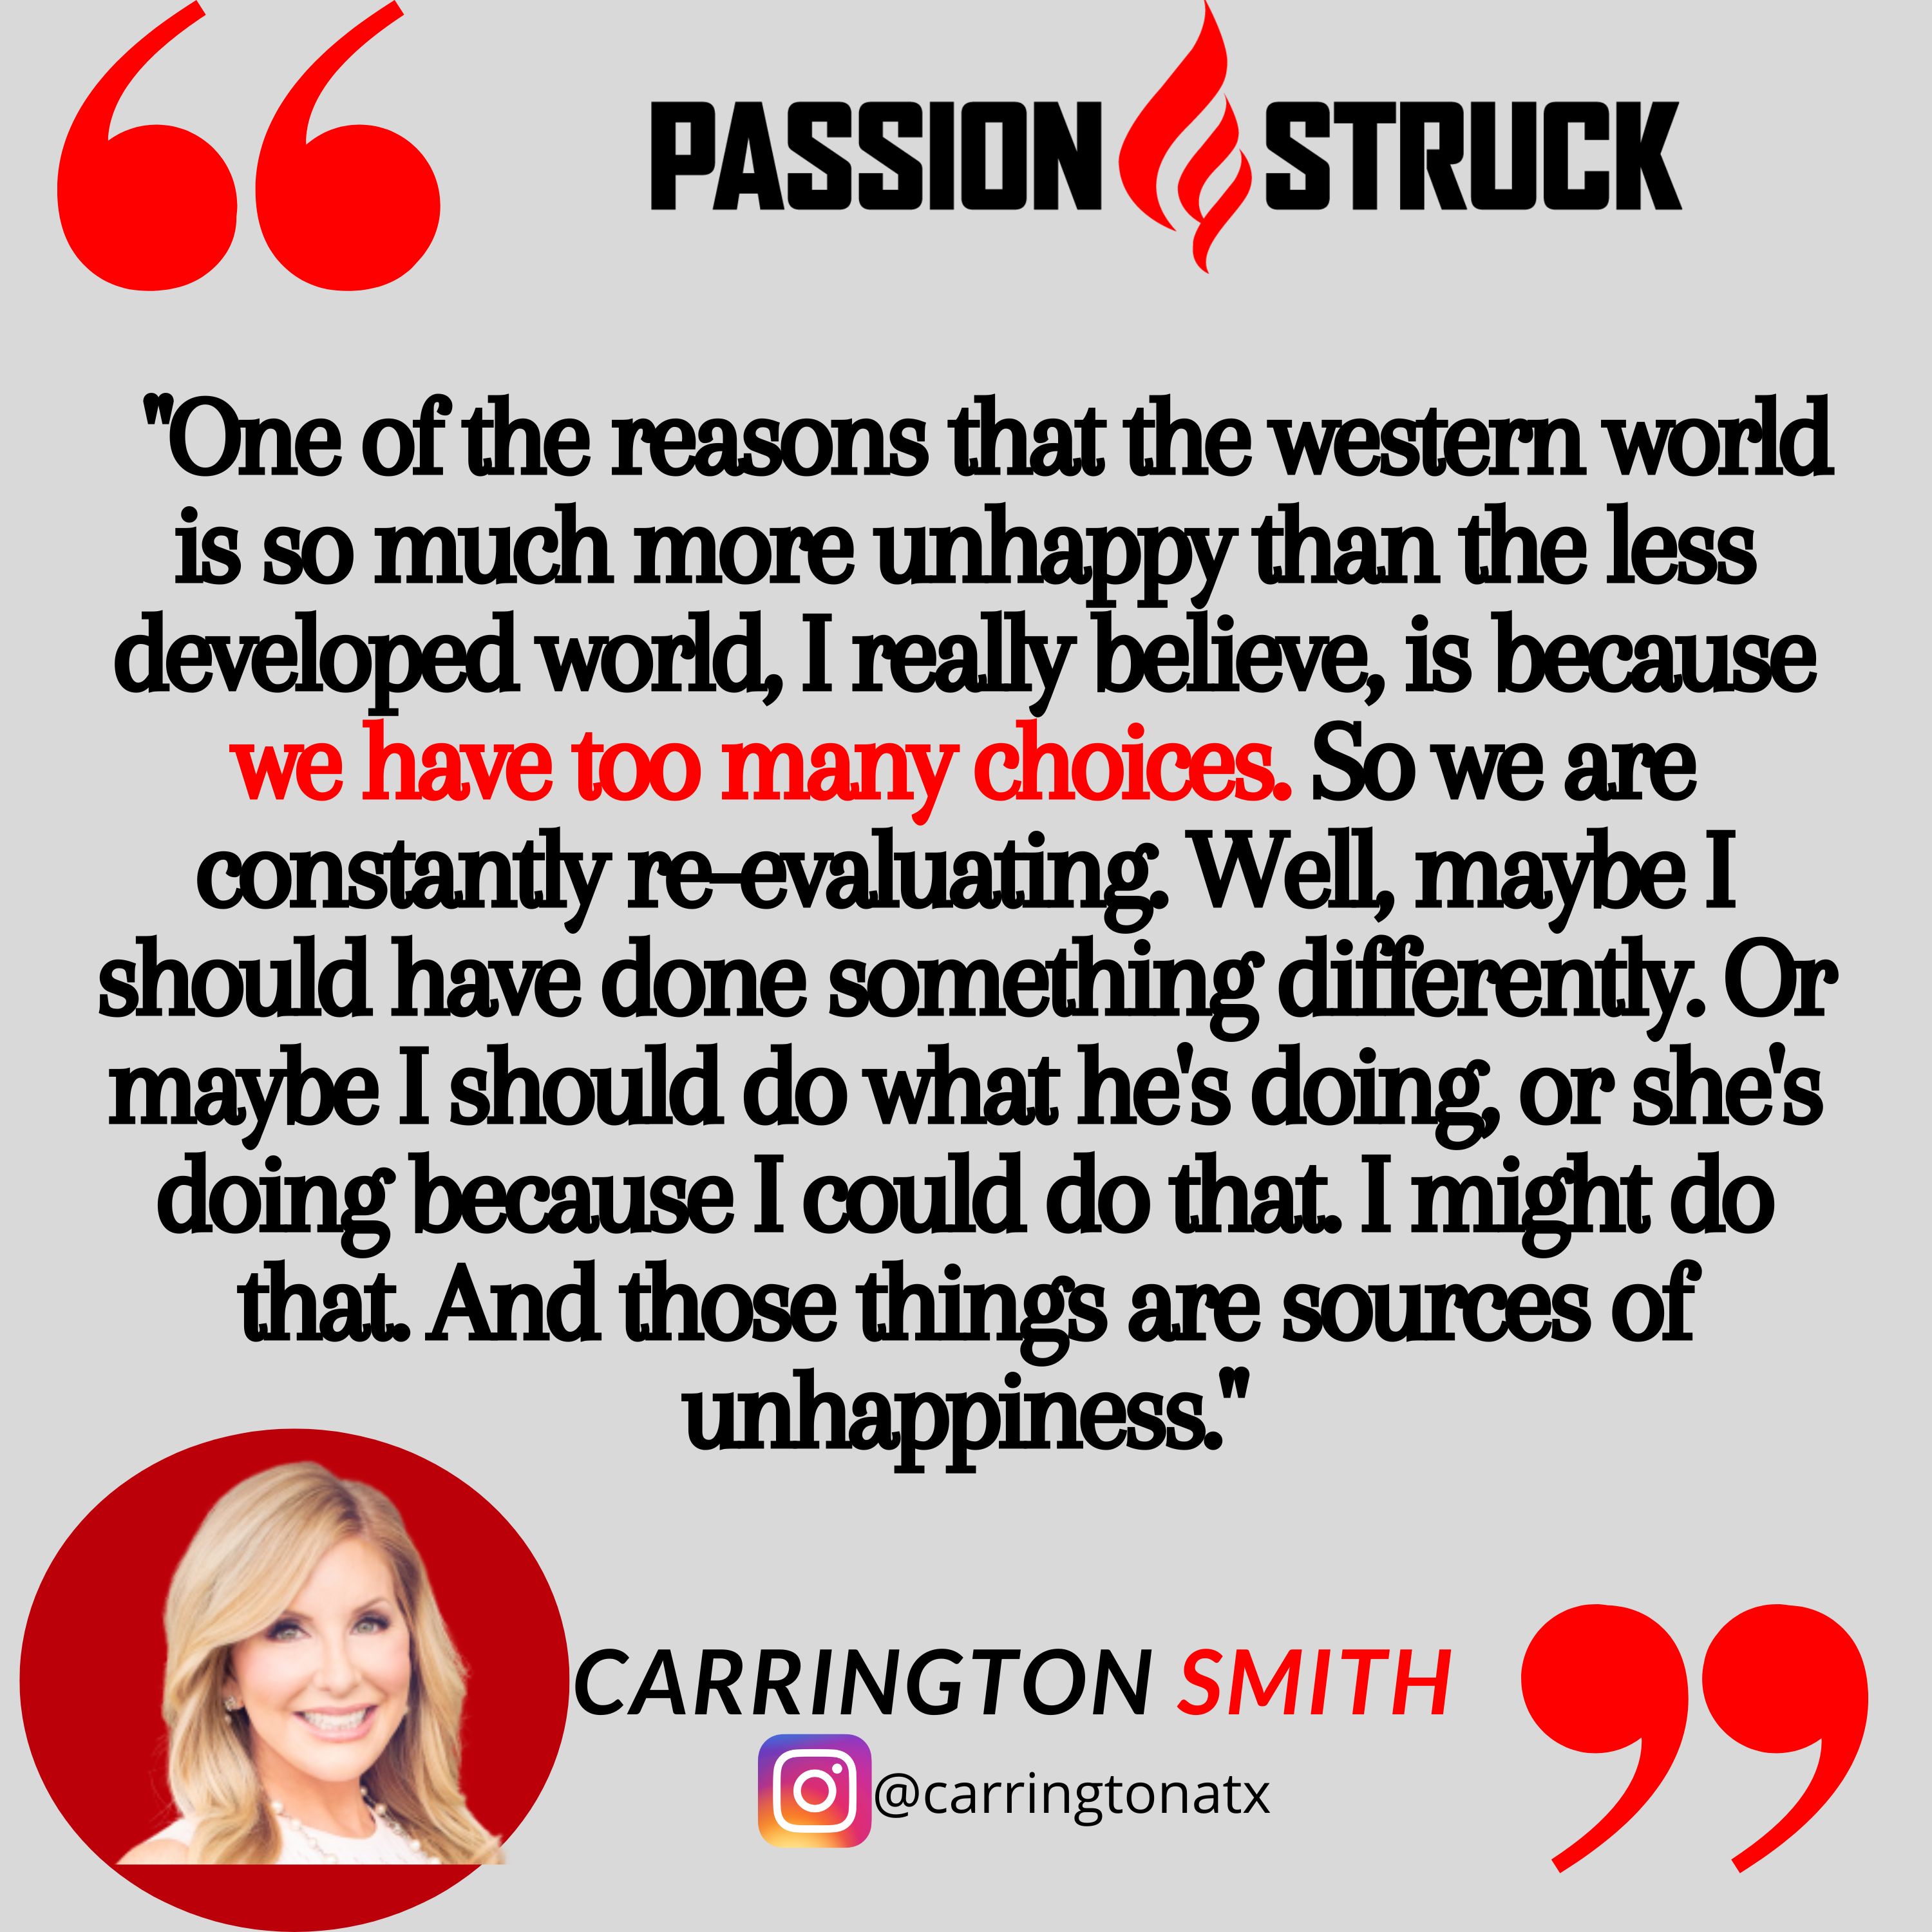 Carrington Smith quote from the Passion Struck podcast""One of the reasons that the western world is so much more unhappy than the less developed world, I really believe, is because we have too many choices. So we are constantly re-evaluating. Well, maybe I should have done something differently. Or maybe I should do what he's doing, or she's doing because I could do that. I might do that. And those things are sources of unhappiness.""One of the reasons that the western world is so much more unhappy than the less developed world, I really believe, is because we have too many choices. So we are constantly re-evaluating. Well, maybe I should have done something differently. Or maybe I should do what he's doing, or she's doing because I could do that. I might do that. And those things are sources of unhappiness."